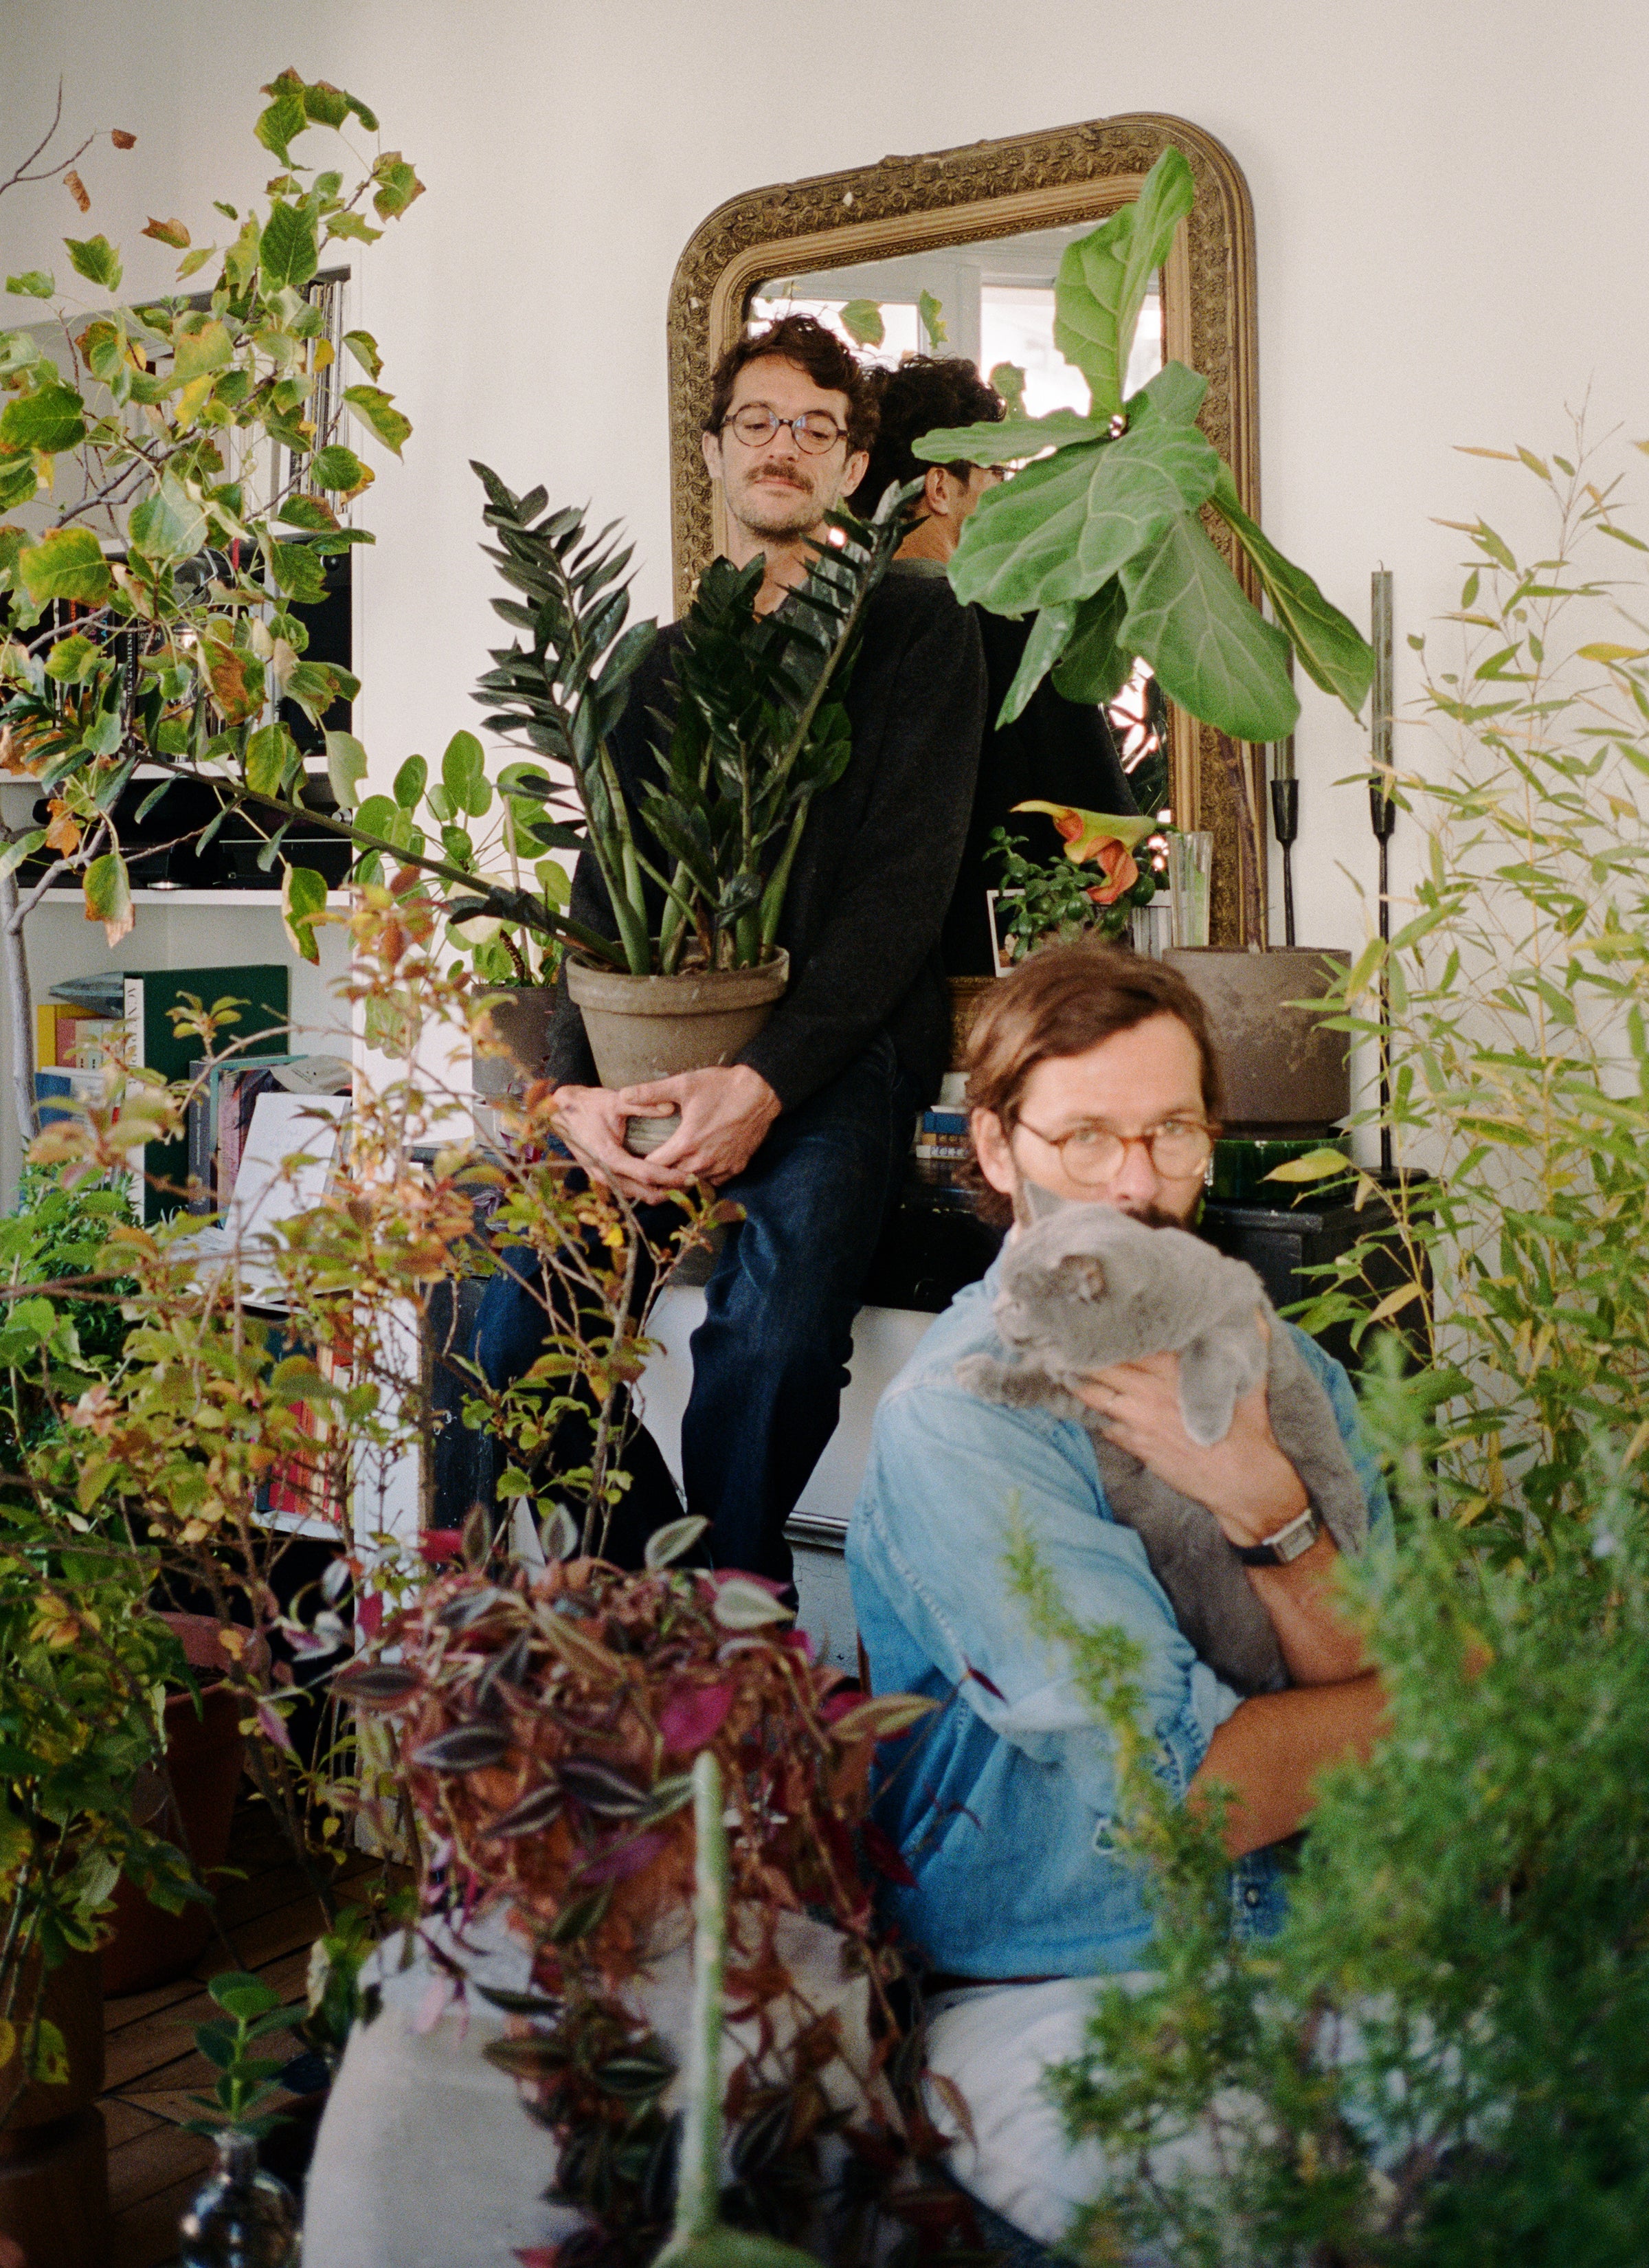 A photograph of Mathias holding their blue-grey cat while Geoffery holding a pot of plants with a collection of house plants surrounded in the room.